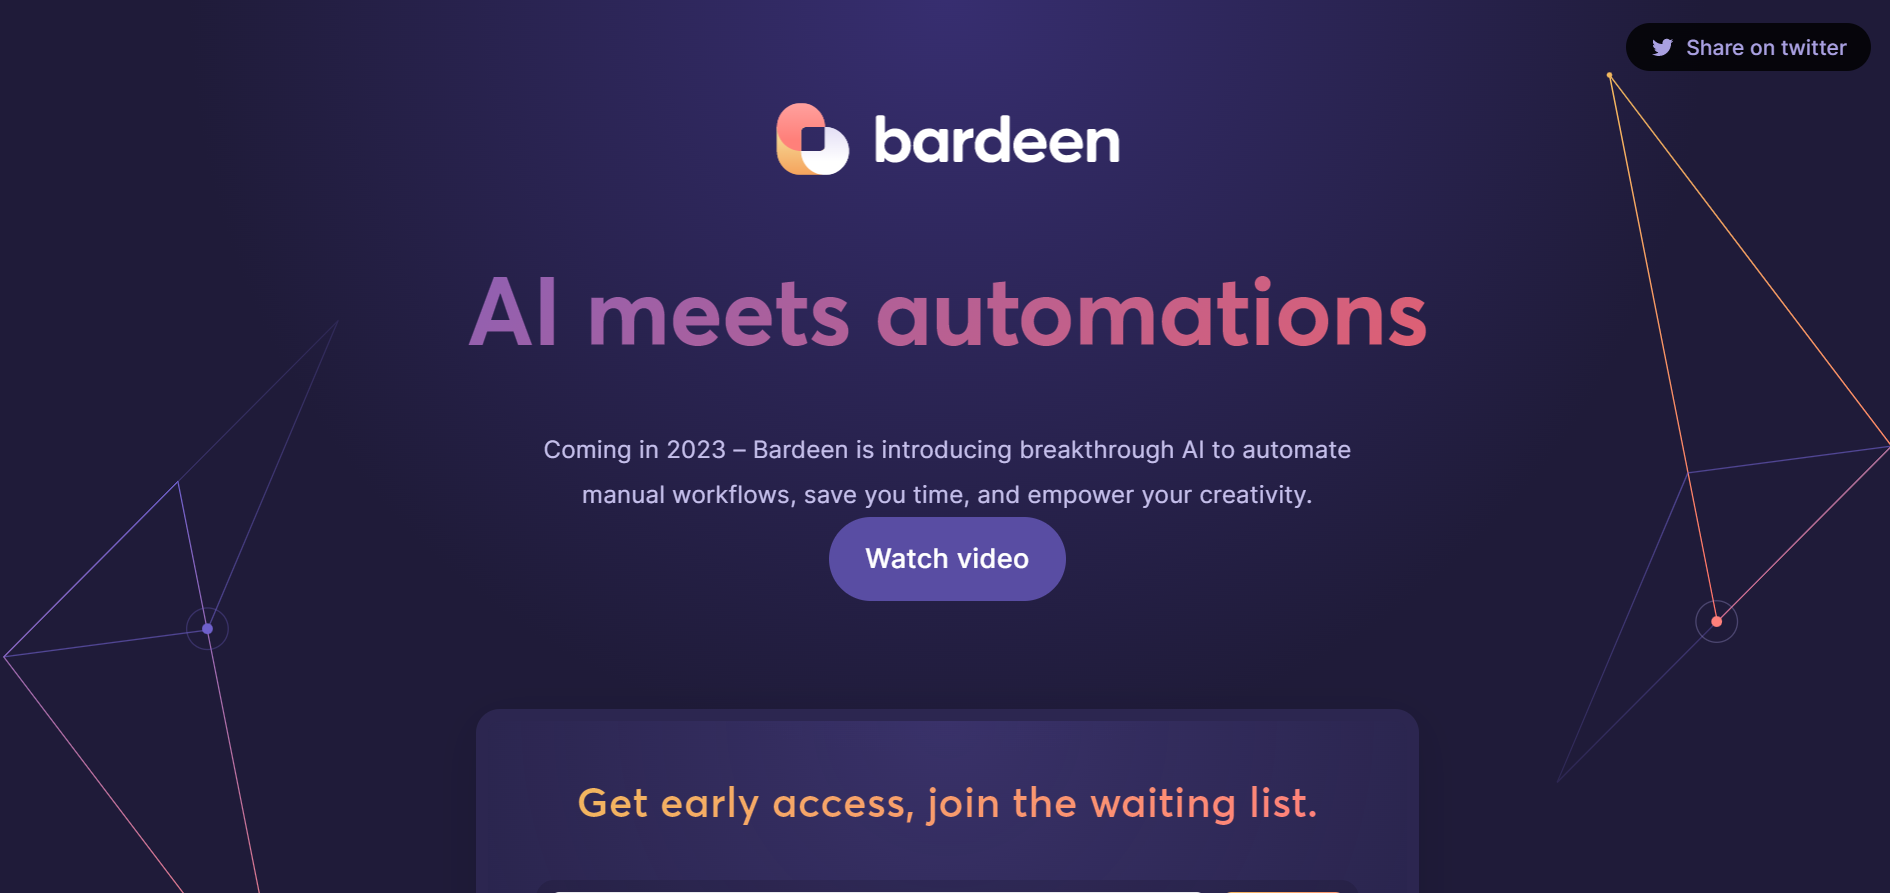 Bardeen.ai: The Ultimate Workflow Automation Solution